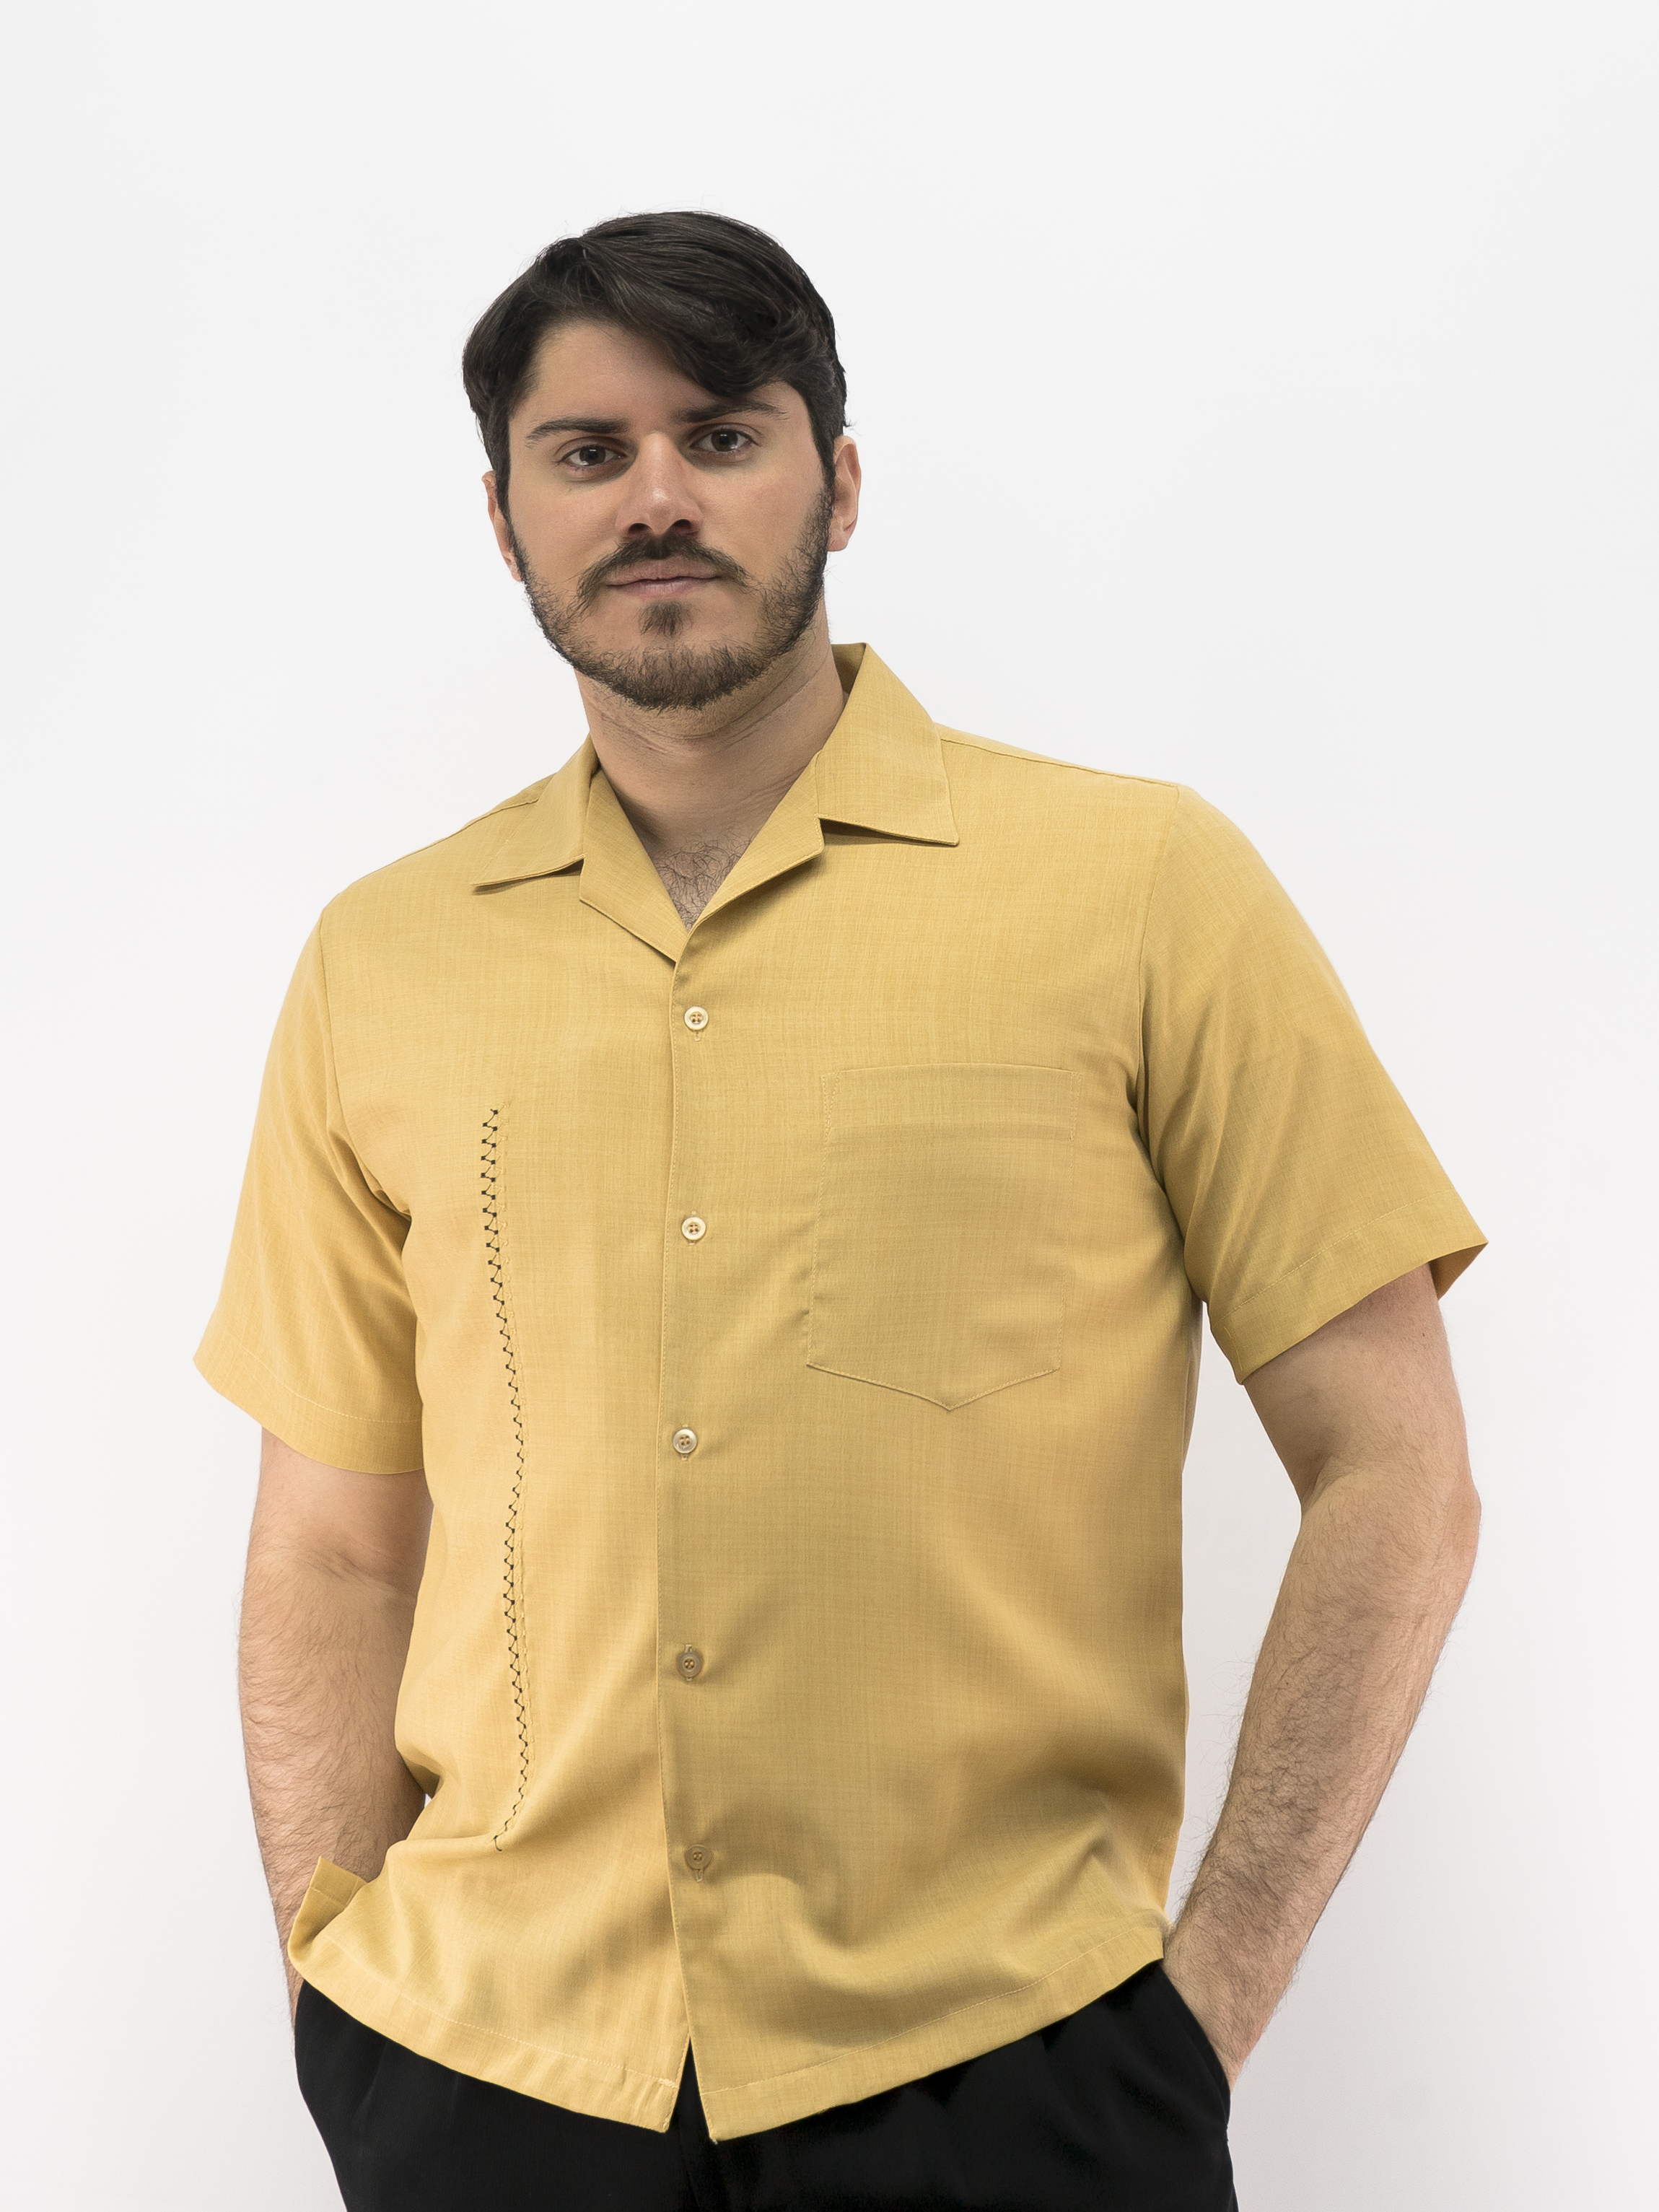 D'Accord Casual Short Sleeve Shirt Gold Micro Fiber Embroidered 5974